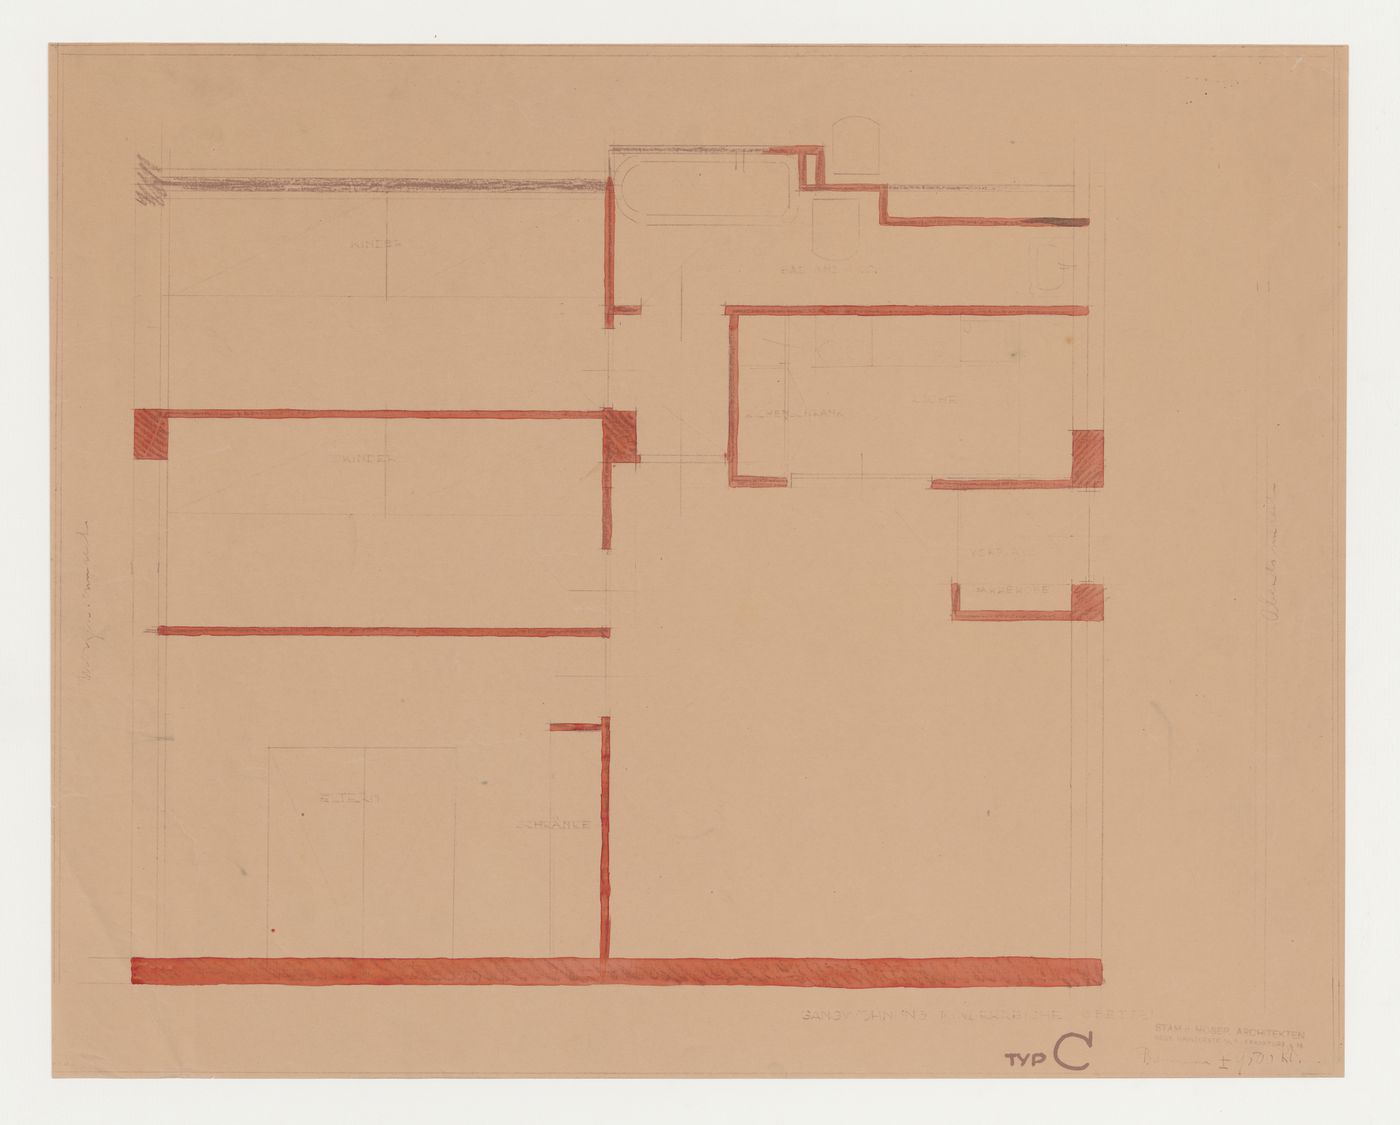 Ground plan for a type C housing unit, Wiesbaden, Germany